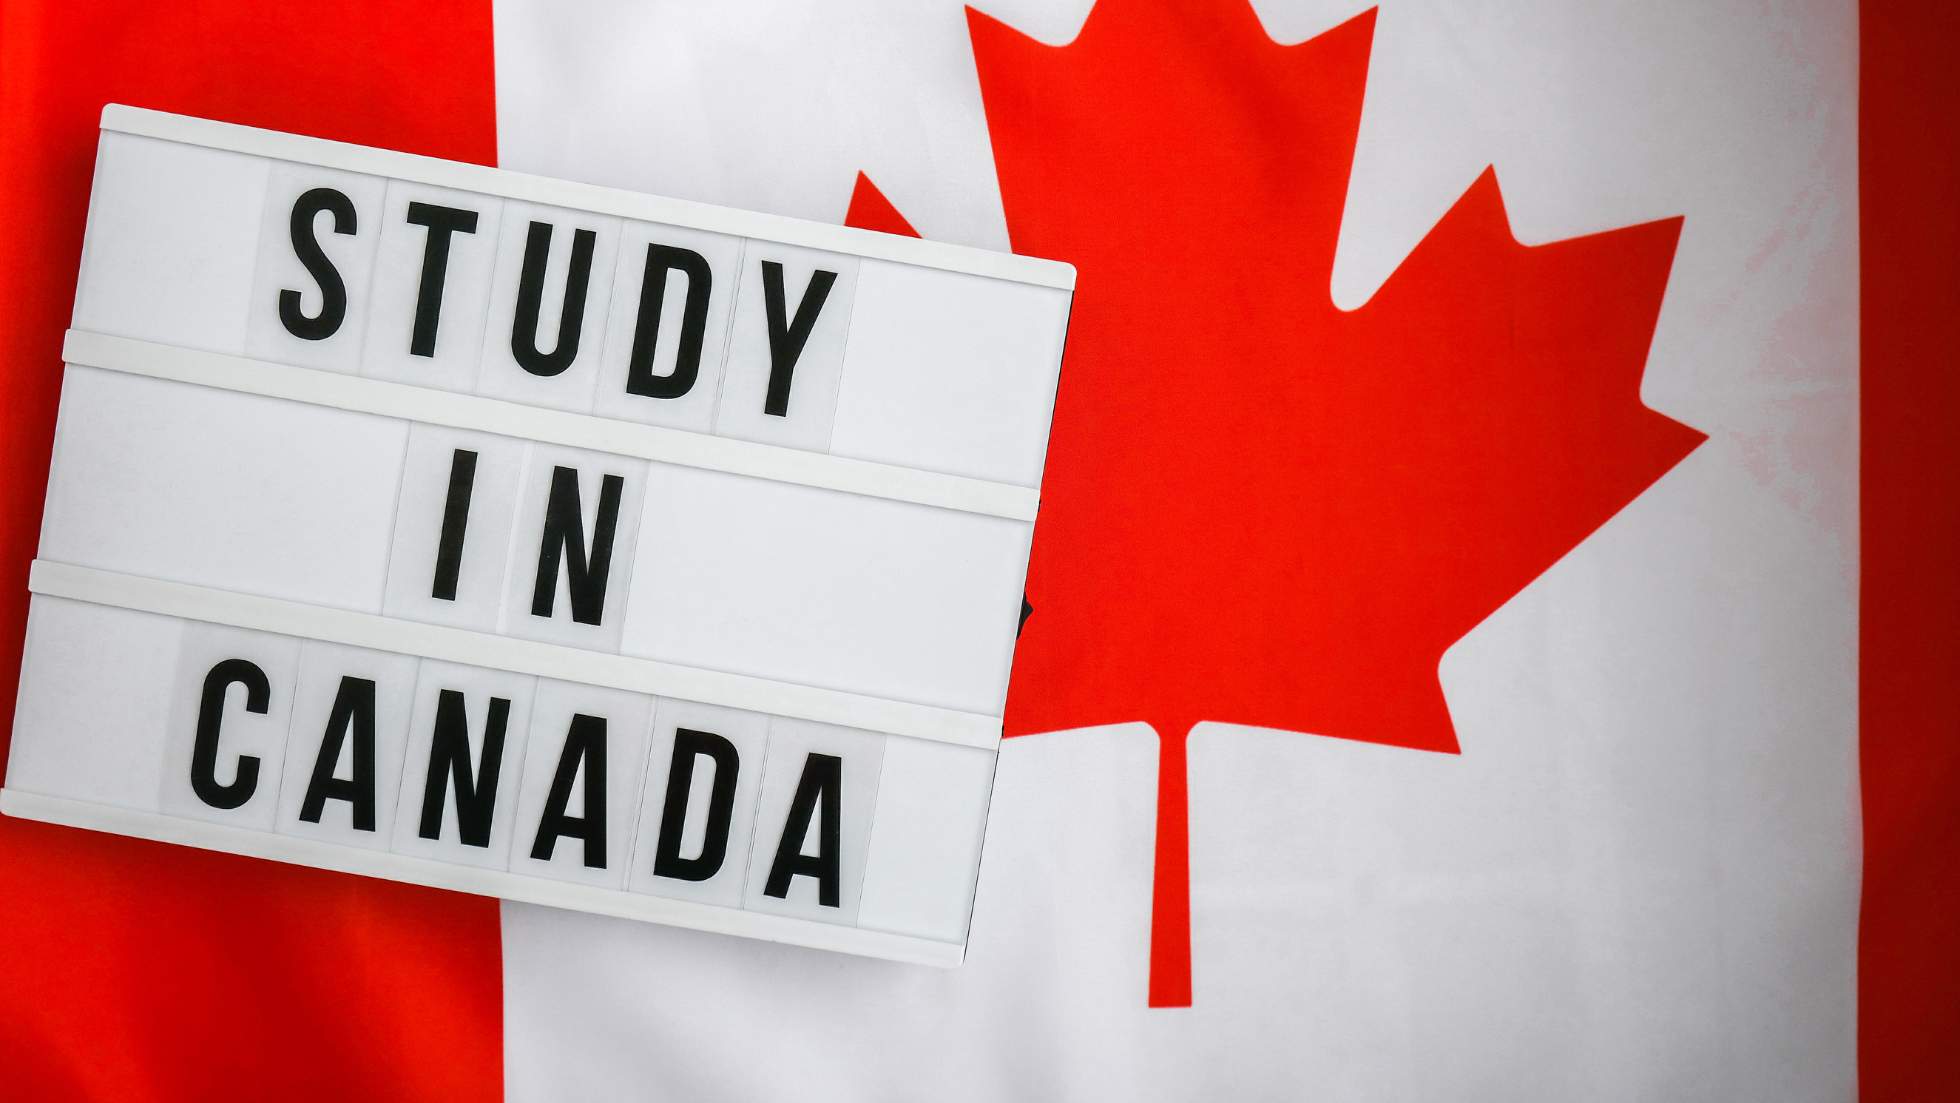 More opportunities for international students in Canada